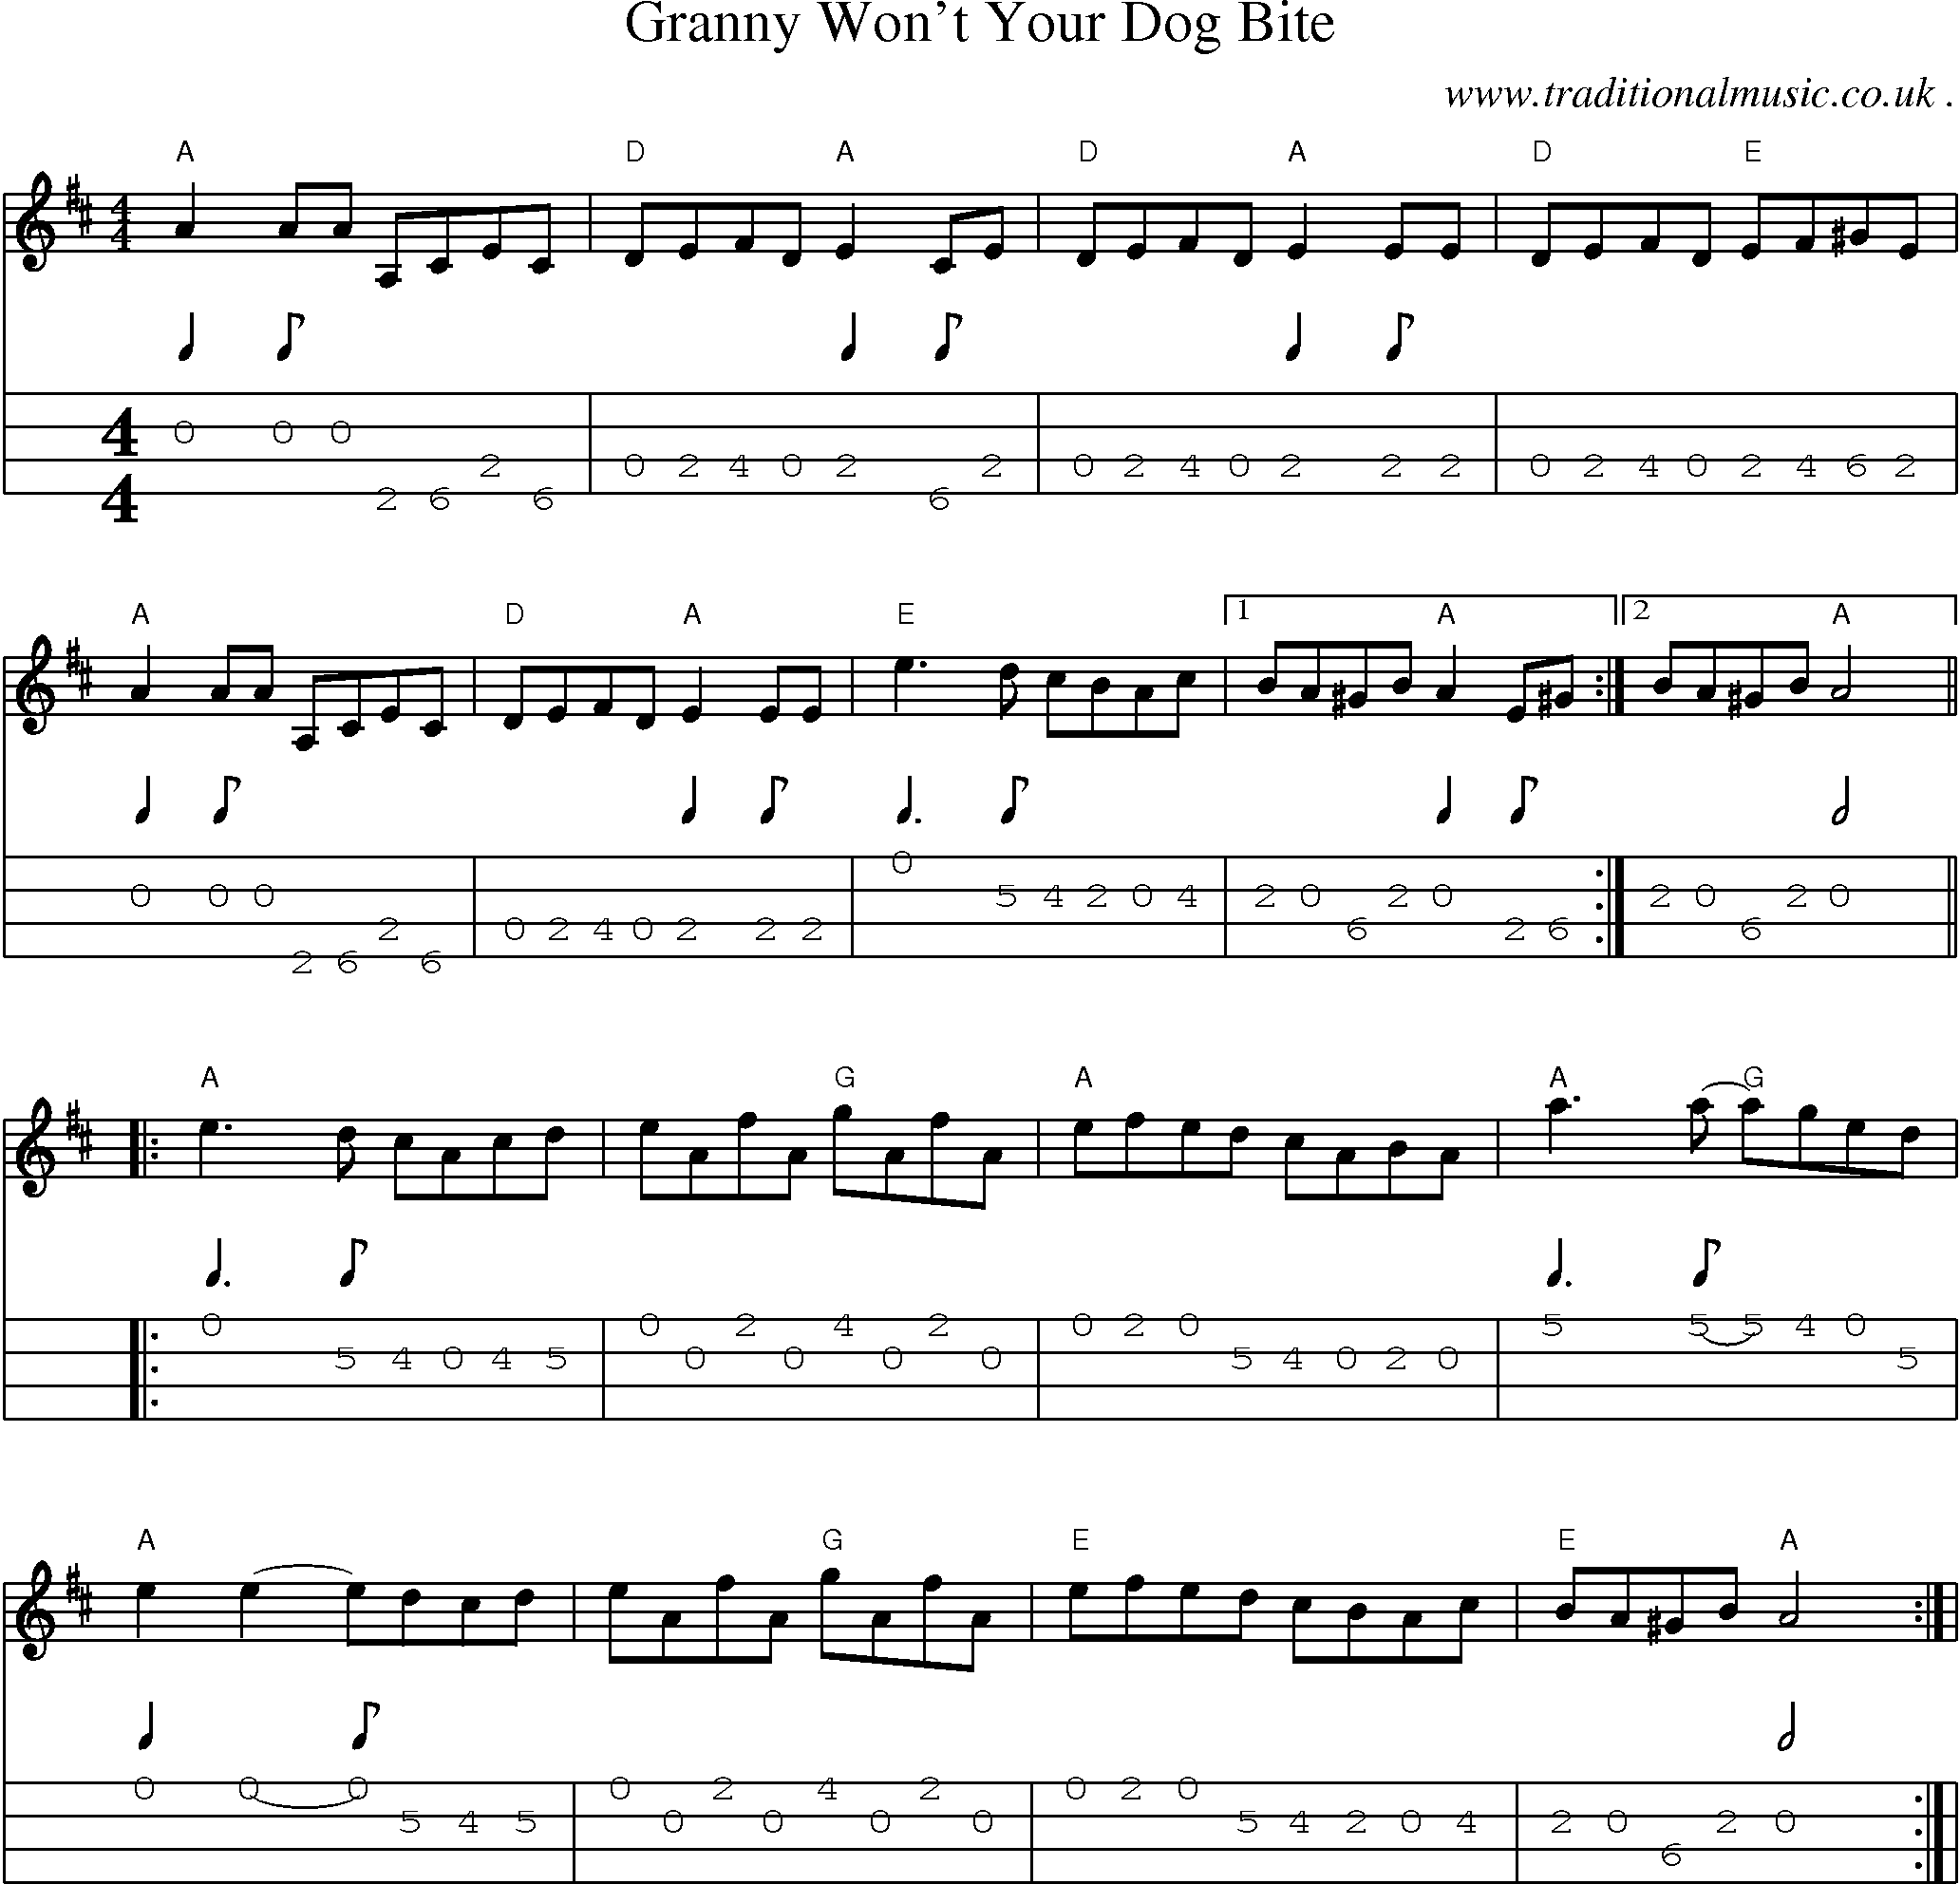 Music Score and Mandolin Tabs for Granny Wont Your Dog Bite